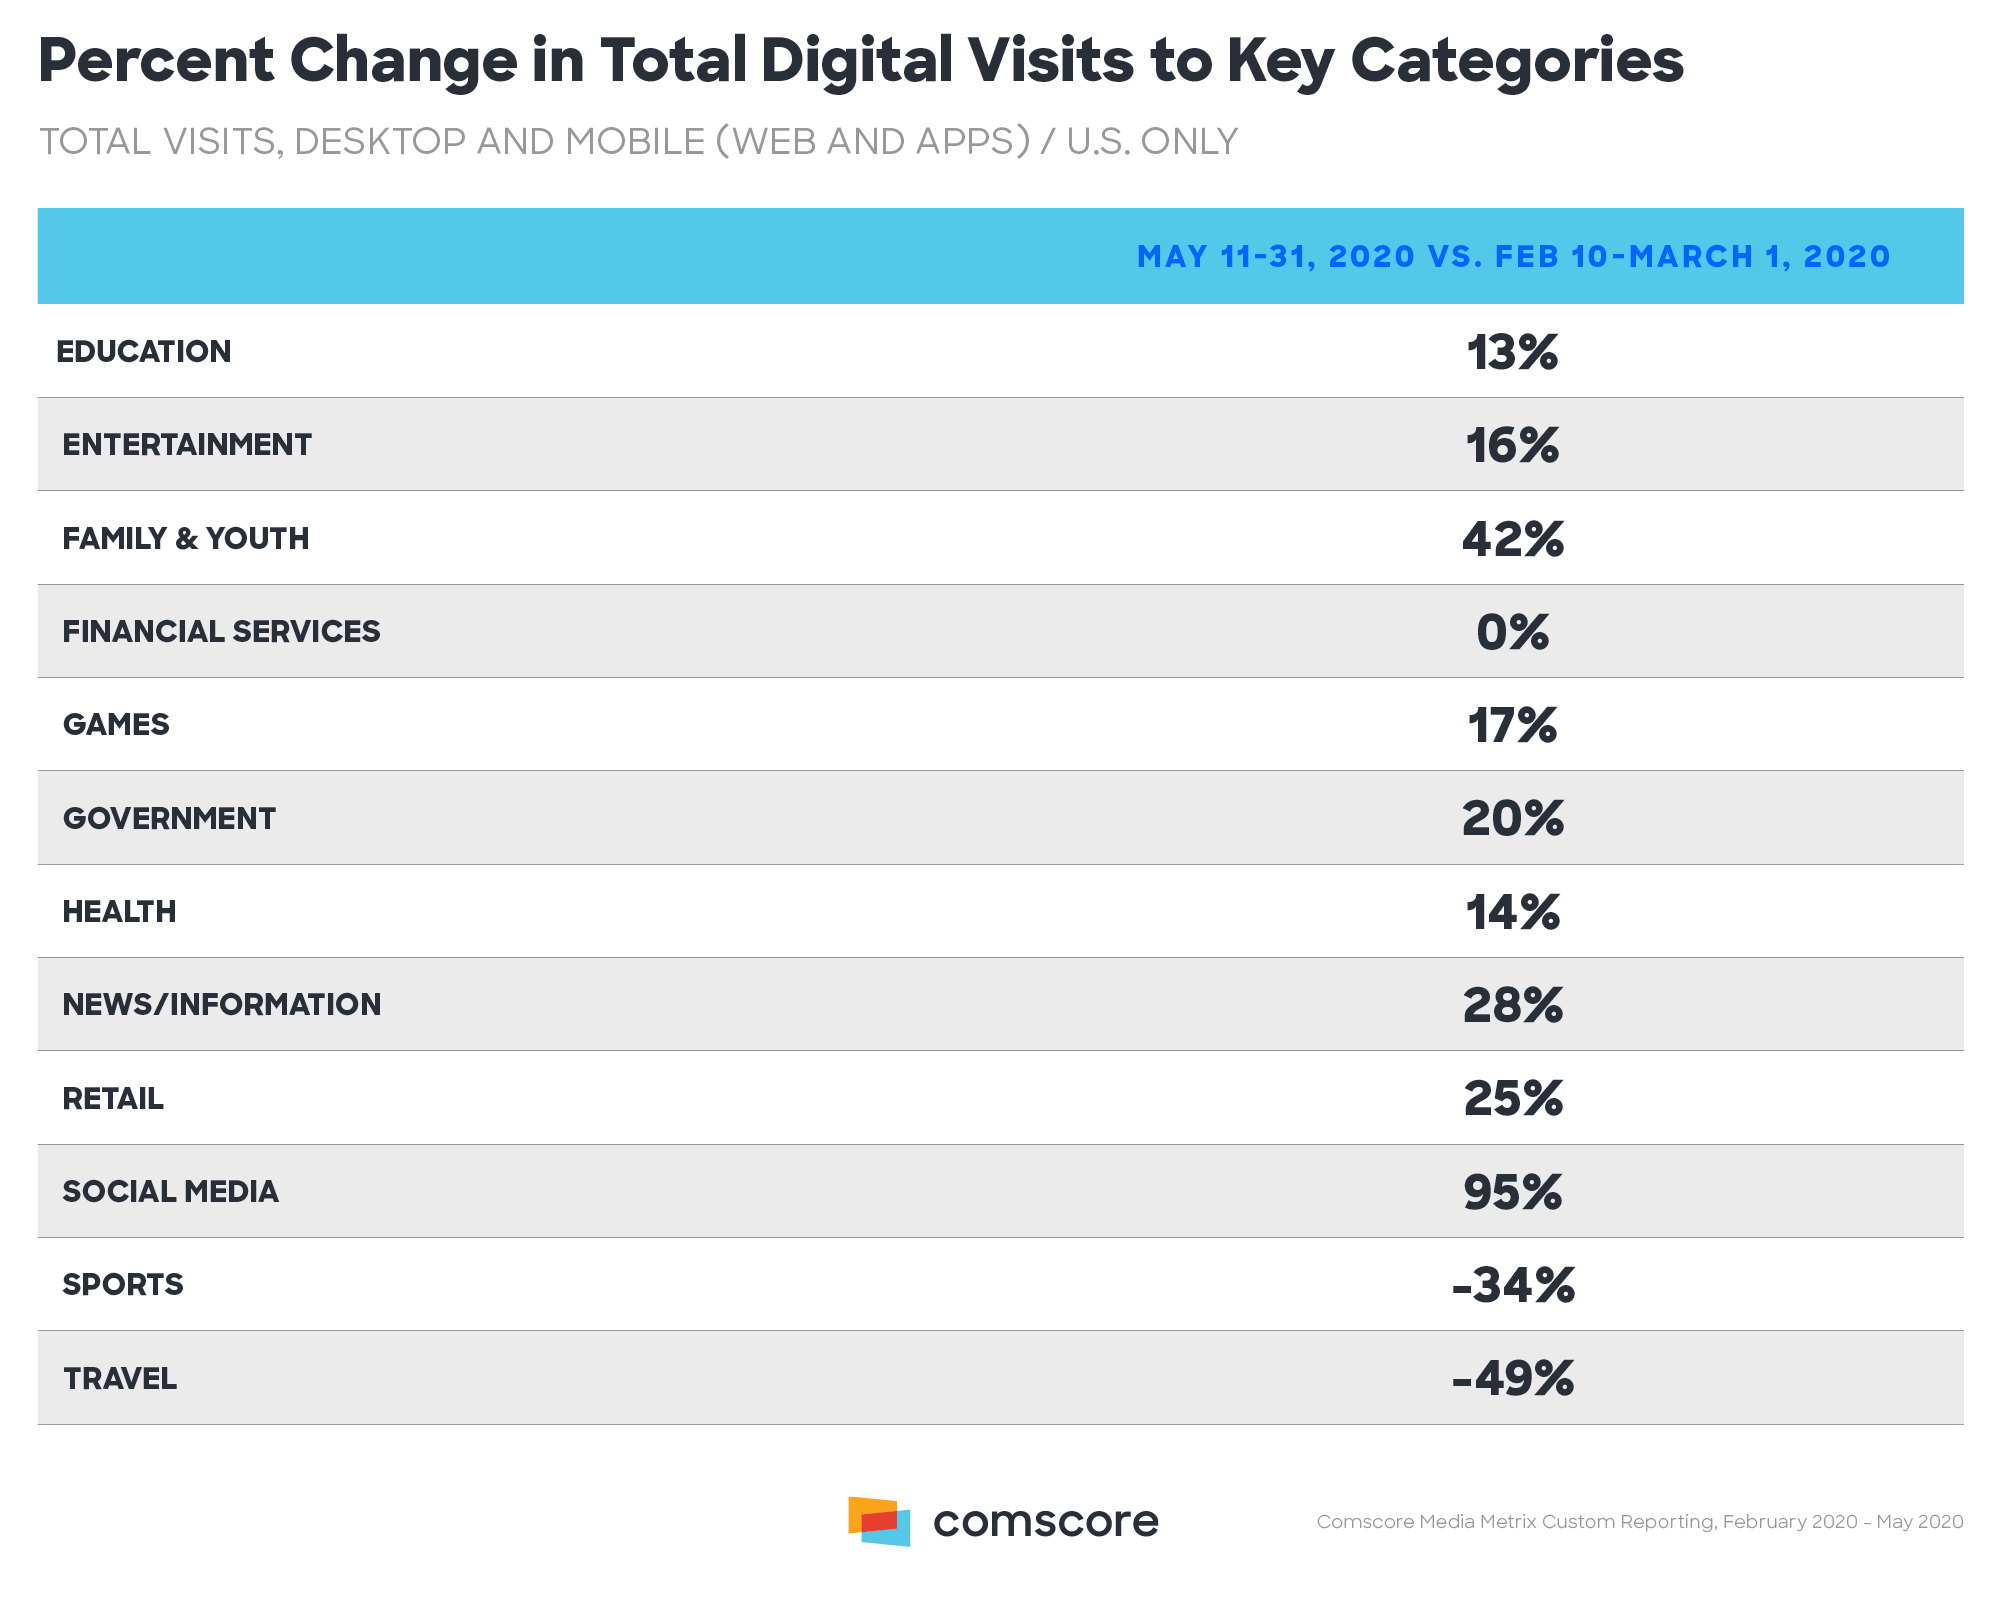 Percent Change in Total Digital Visits to Key Categories